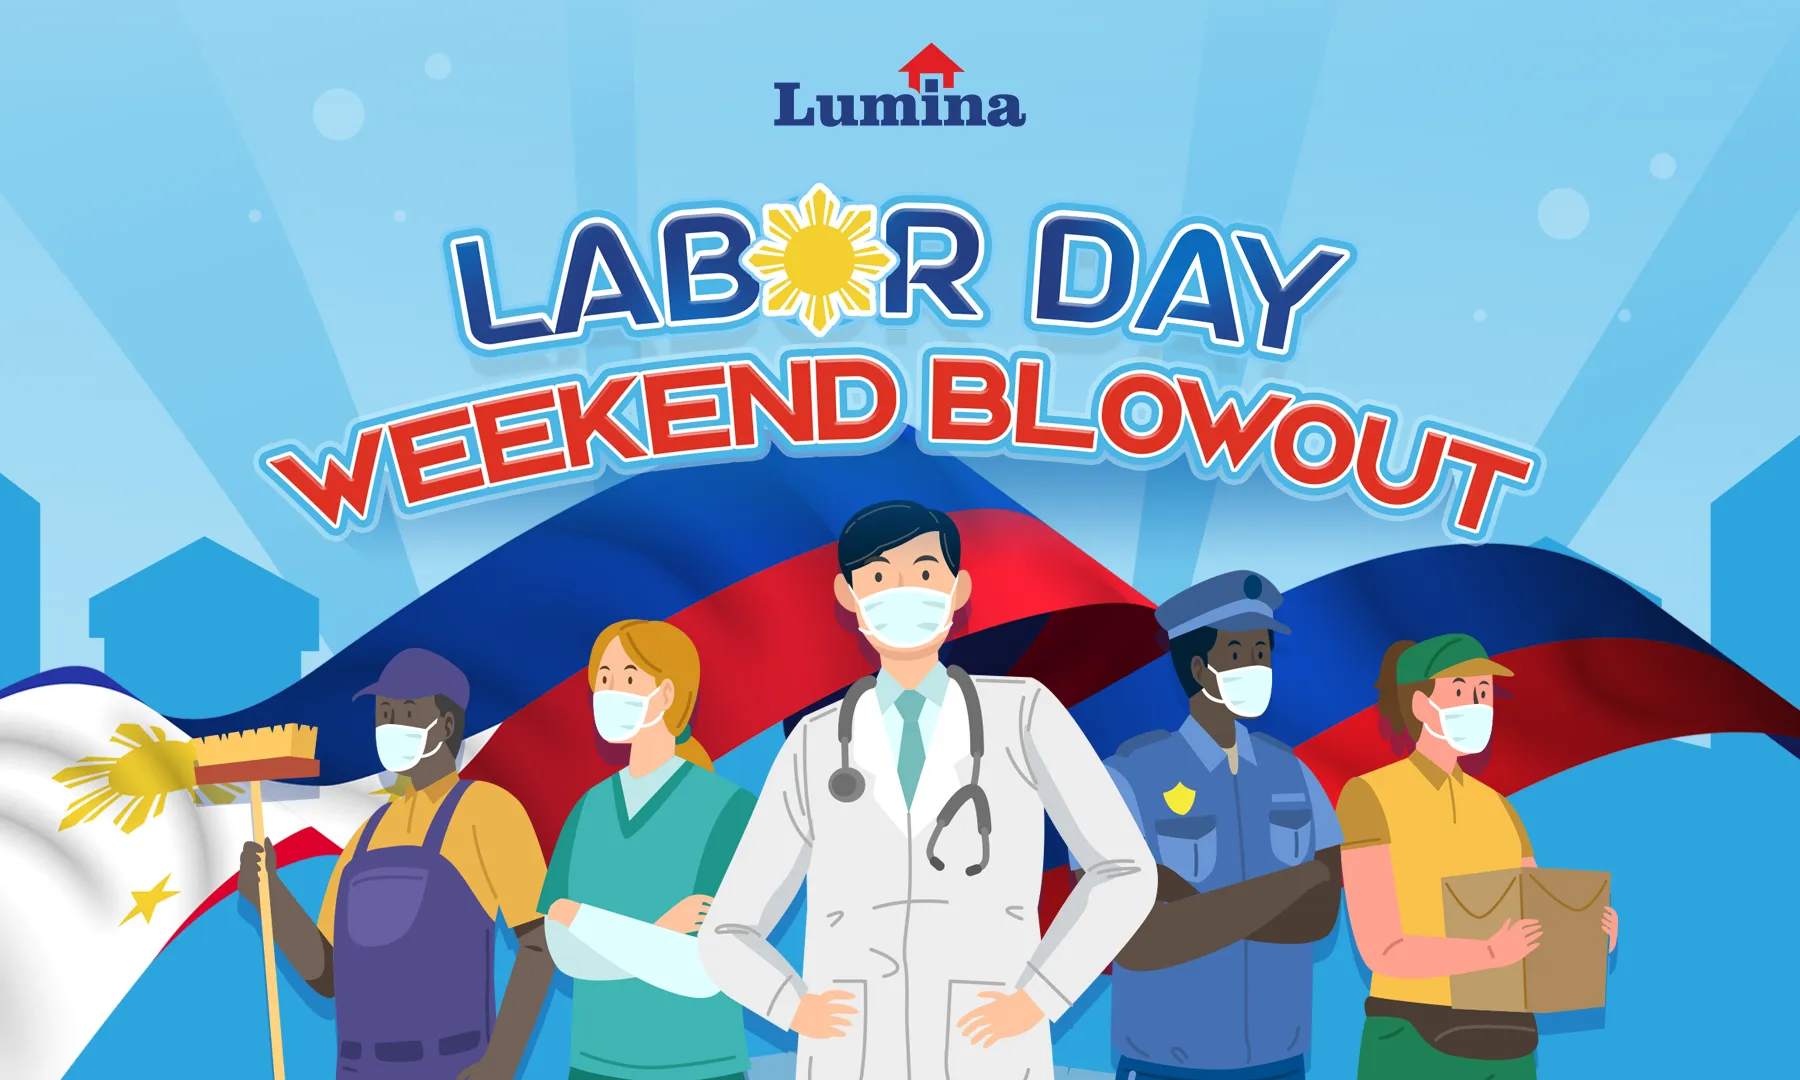 Join Lumina Homes Labor Day Weekend Blowout